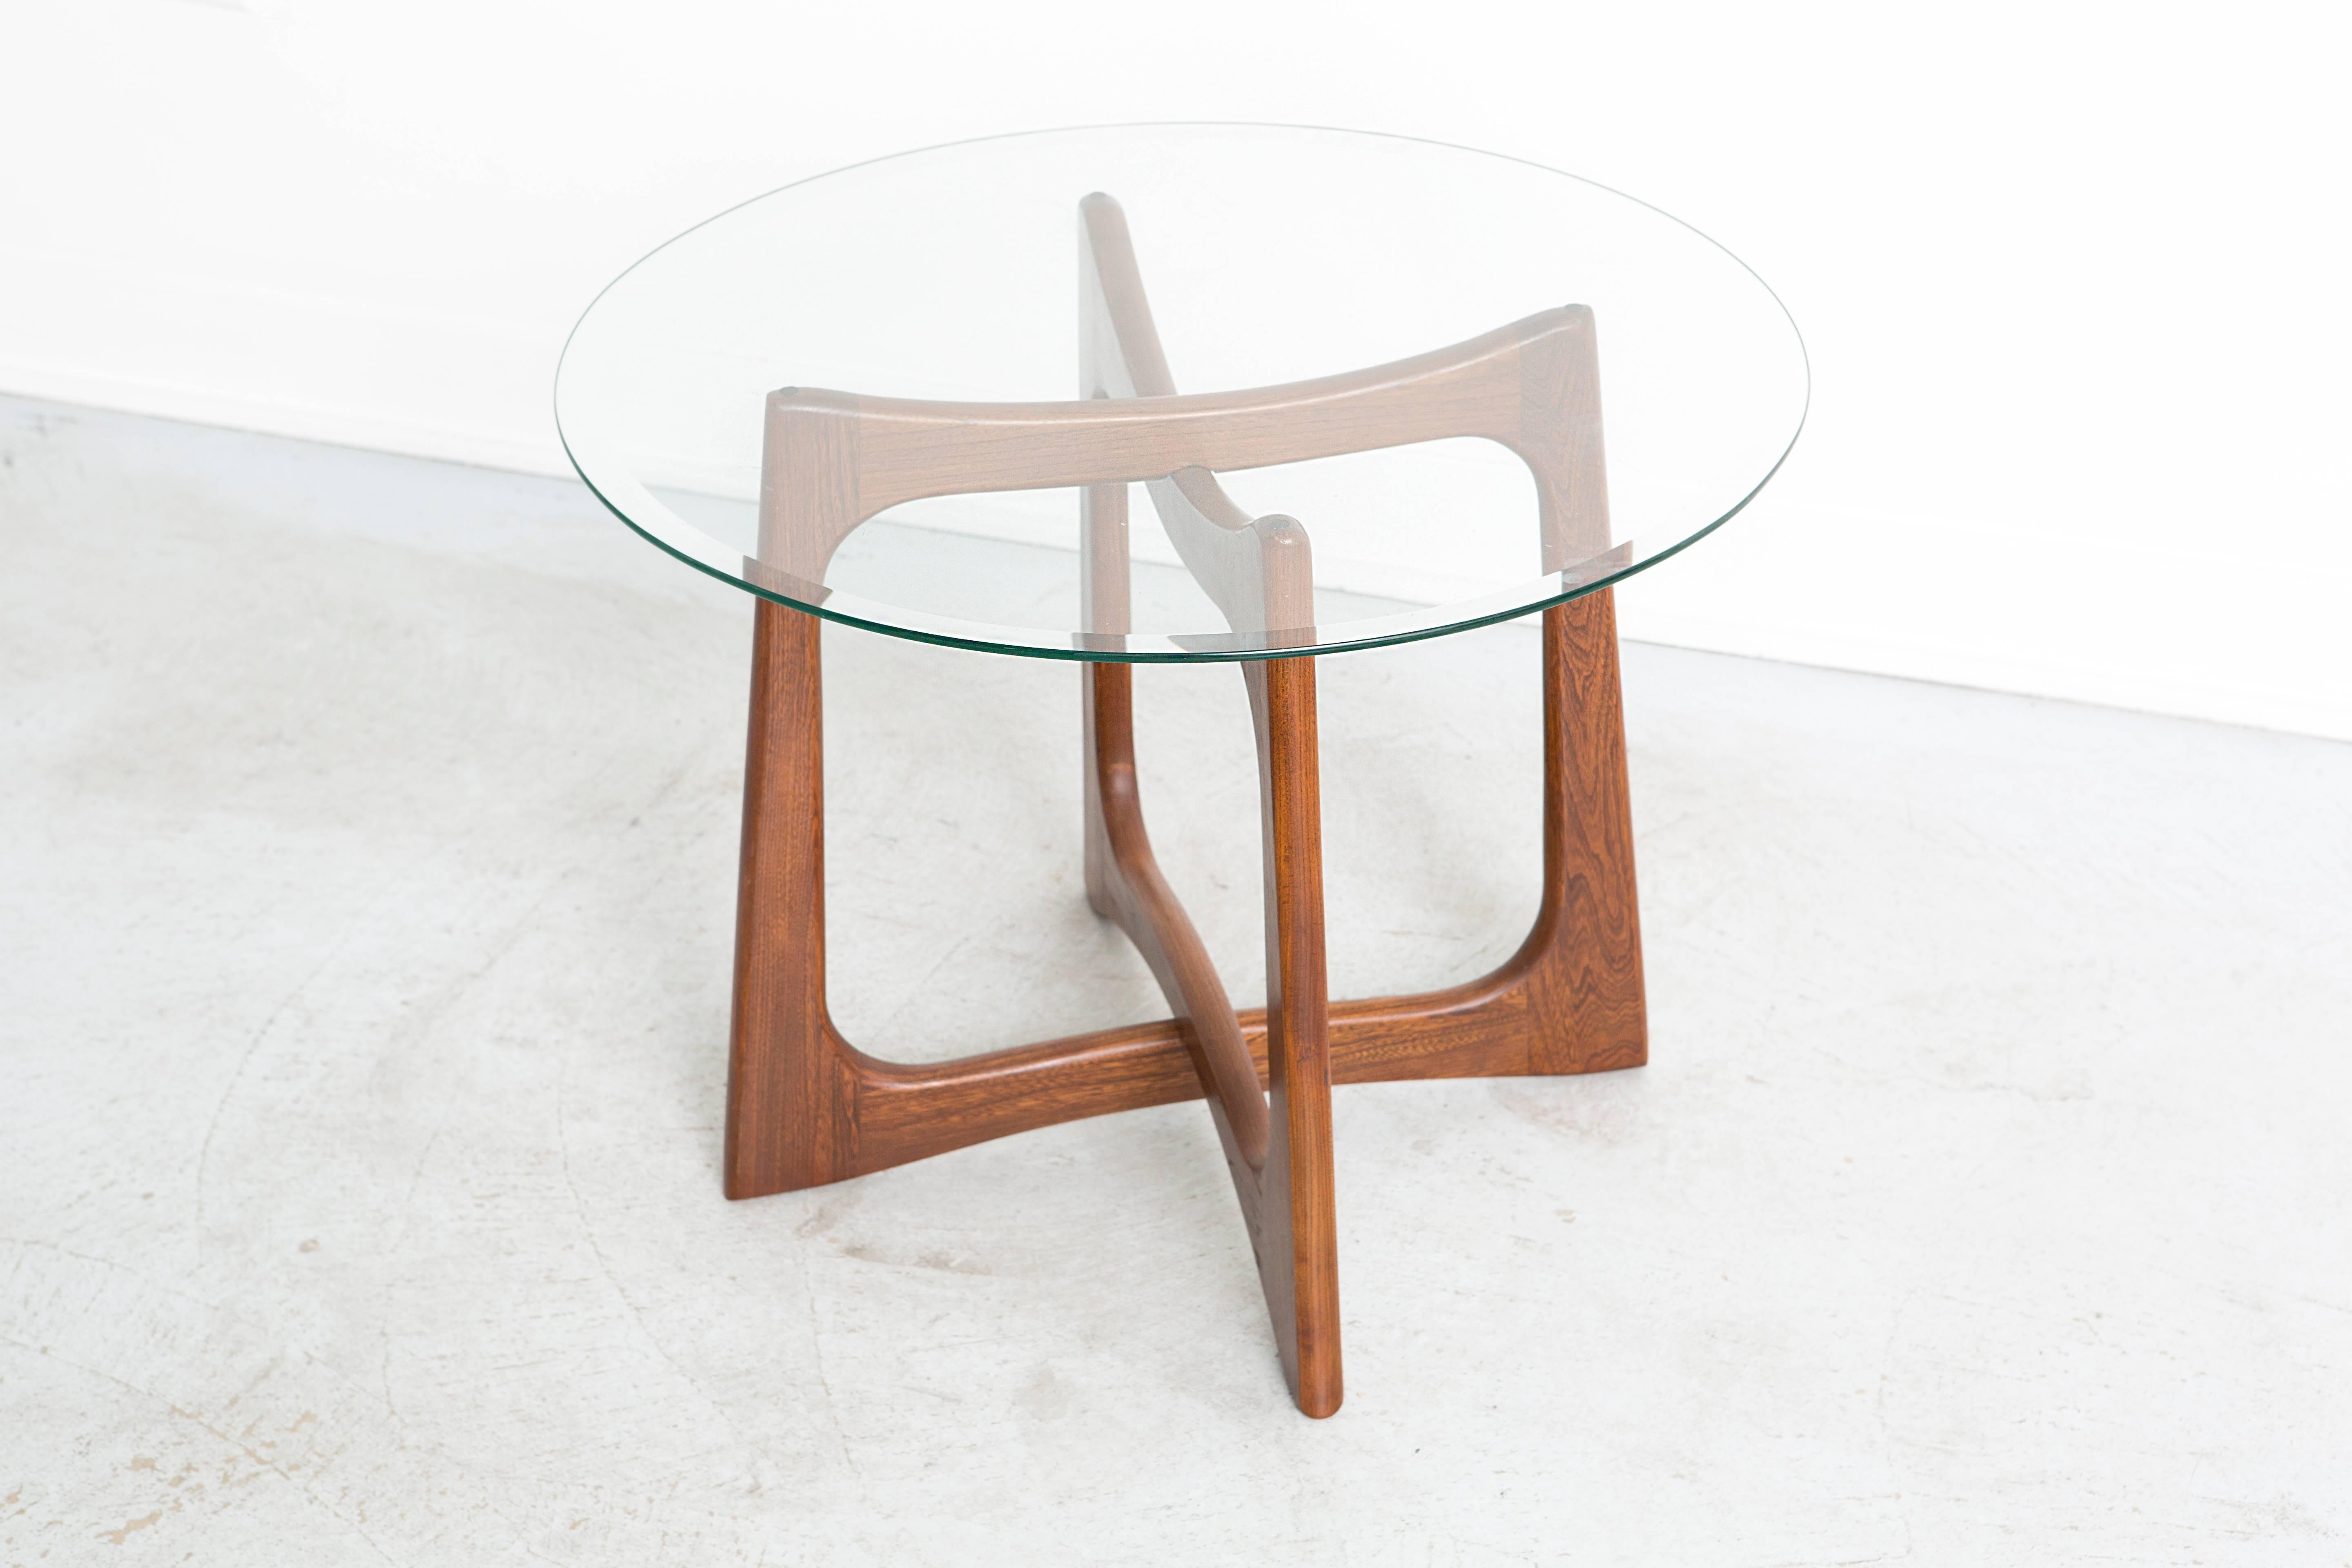 American Mid-Century Modern Adrian Pearsall Sculptural Side Table